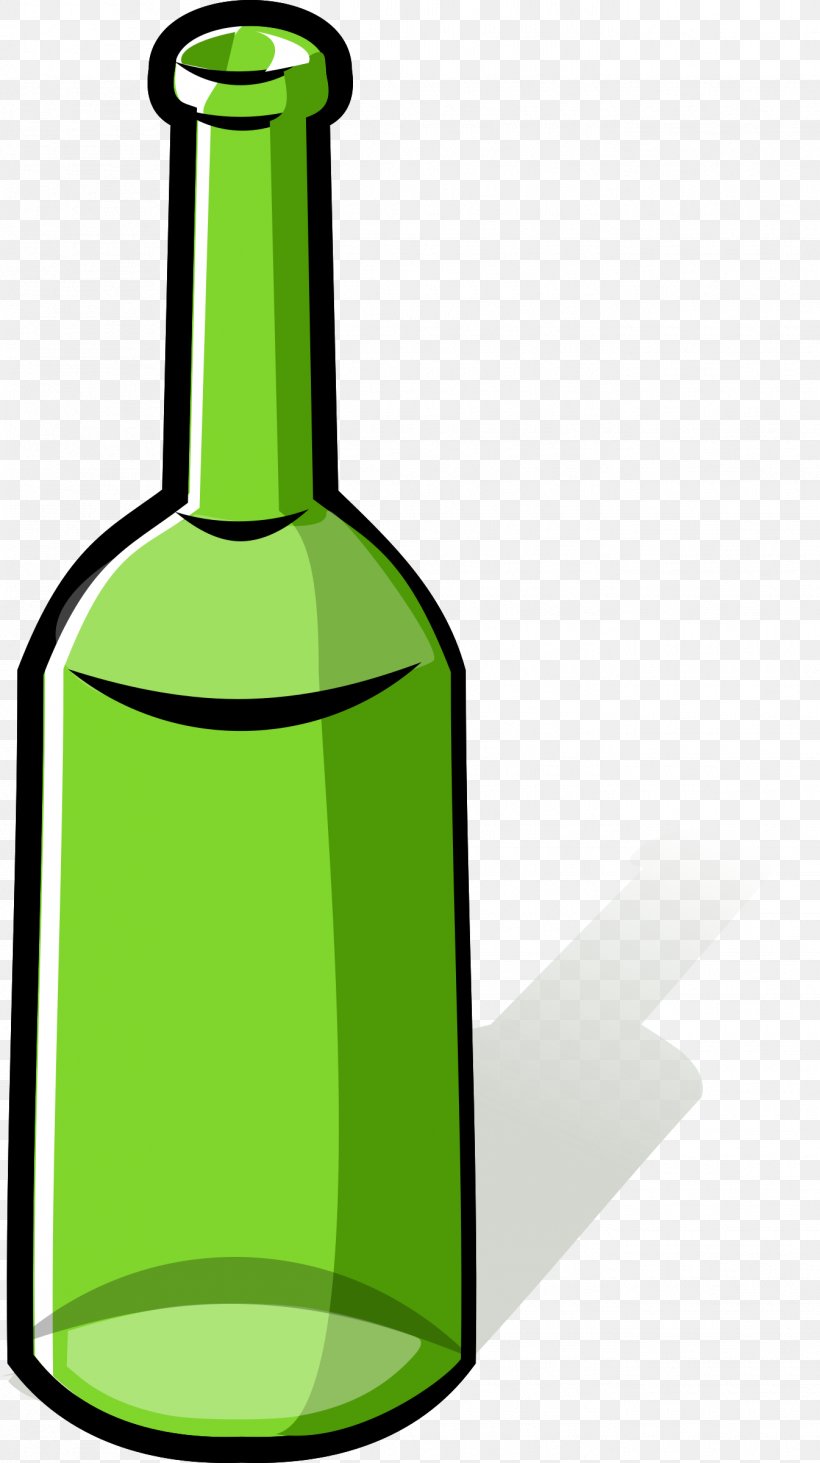 White Wine Glass Bottle Clip Art, PNG, 1345x2400px, White Wine, Alcoholic Drink, Bottle, Container, Cup Download Free